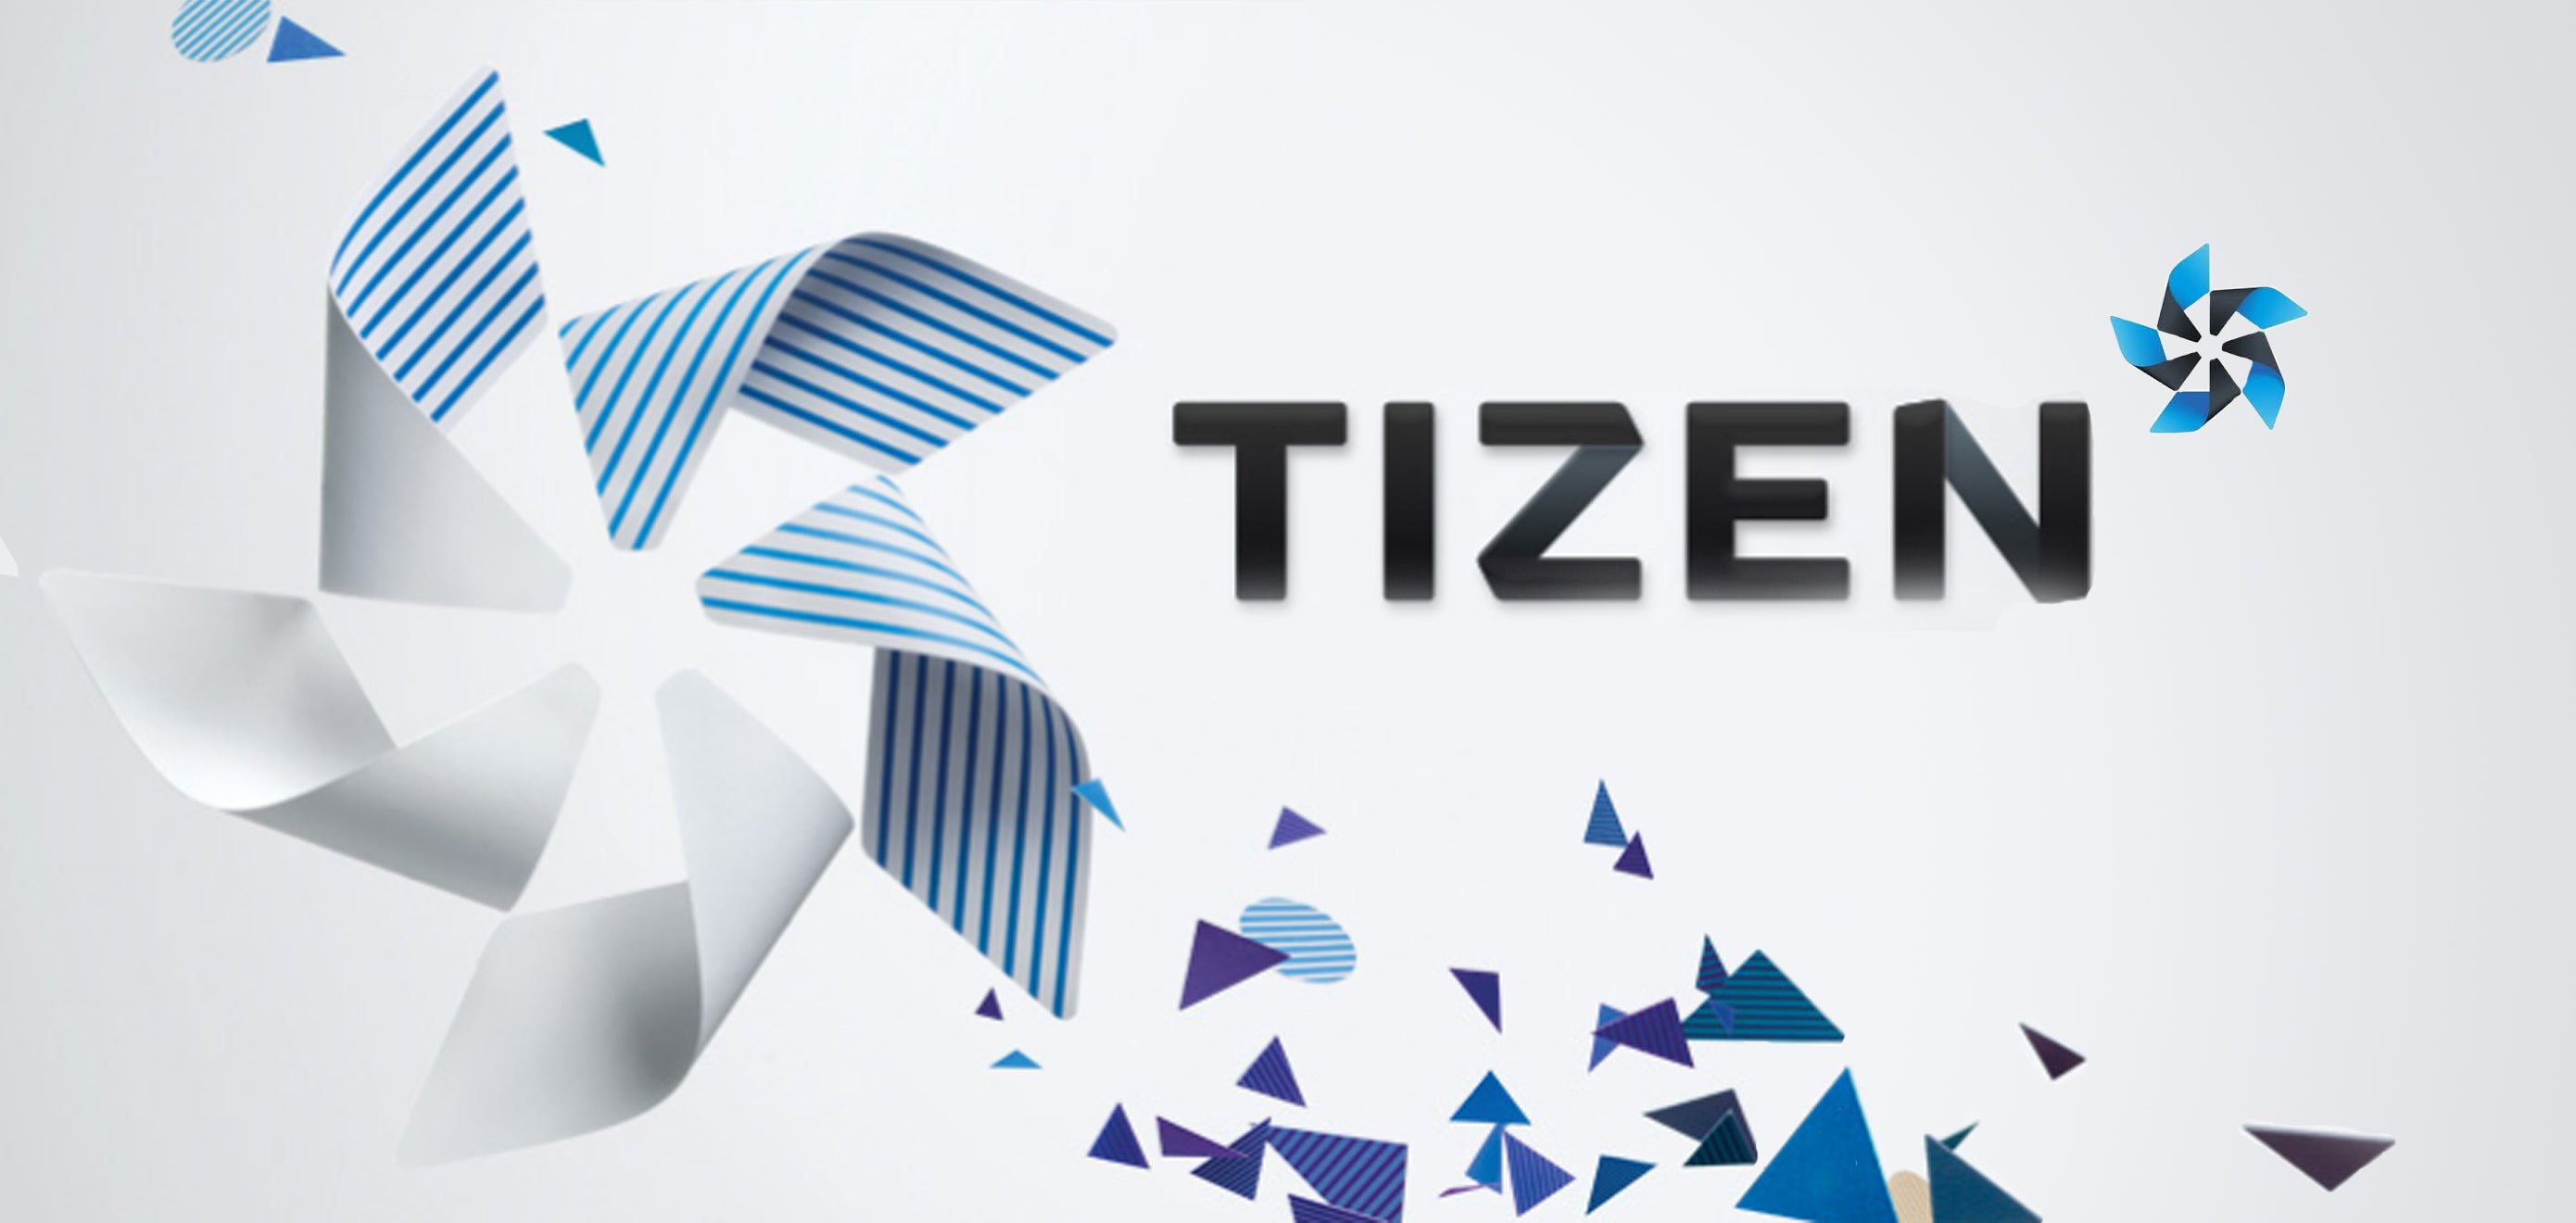 Poll results: The people still have faith in Tizen!